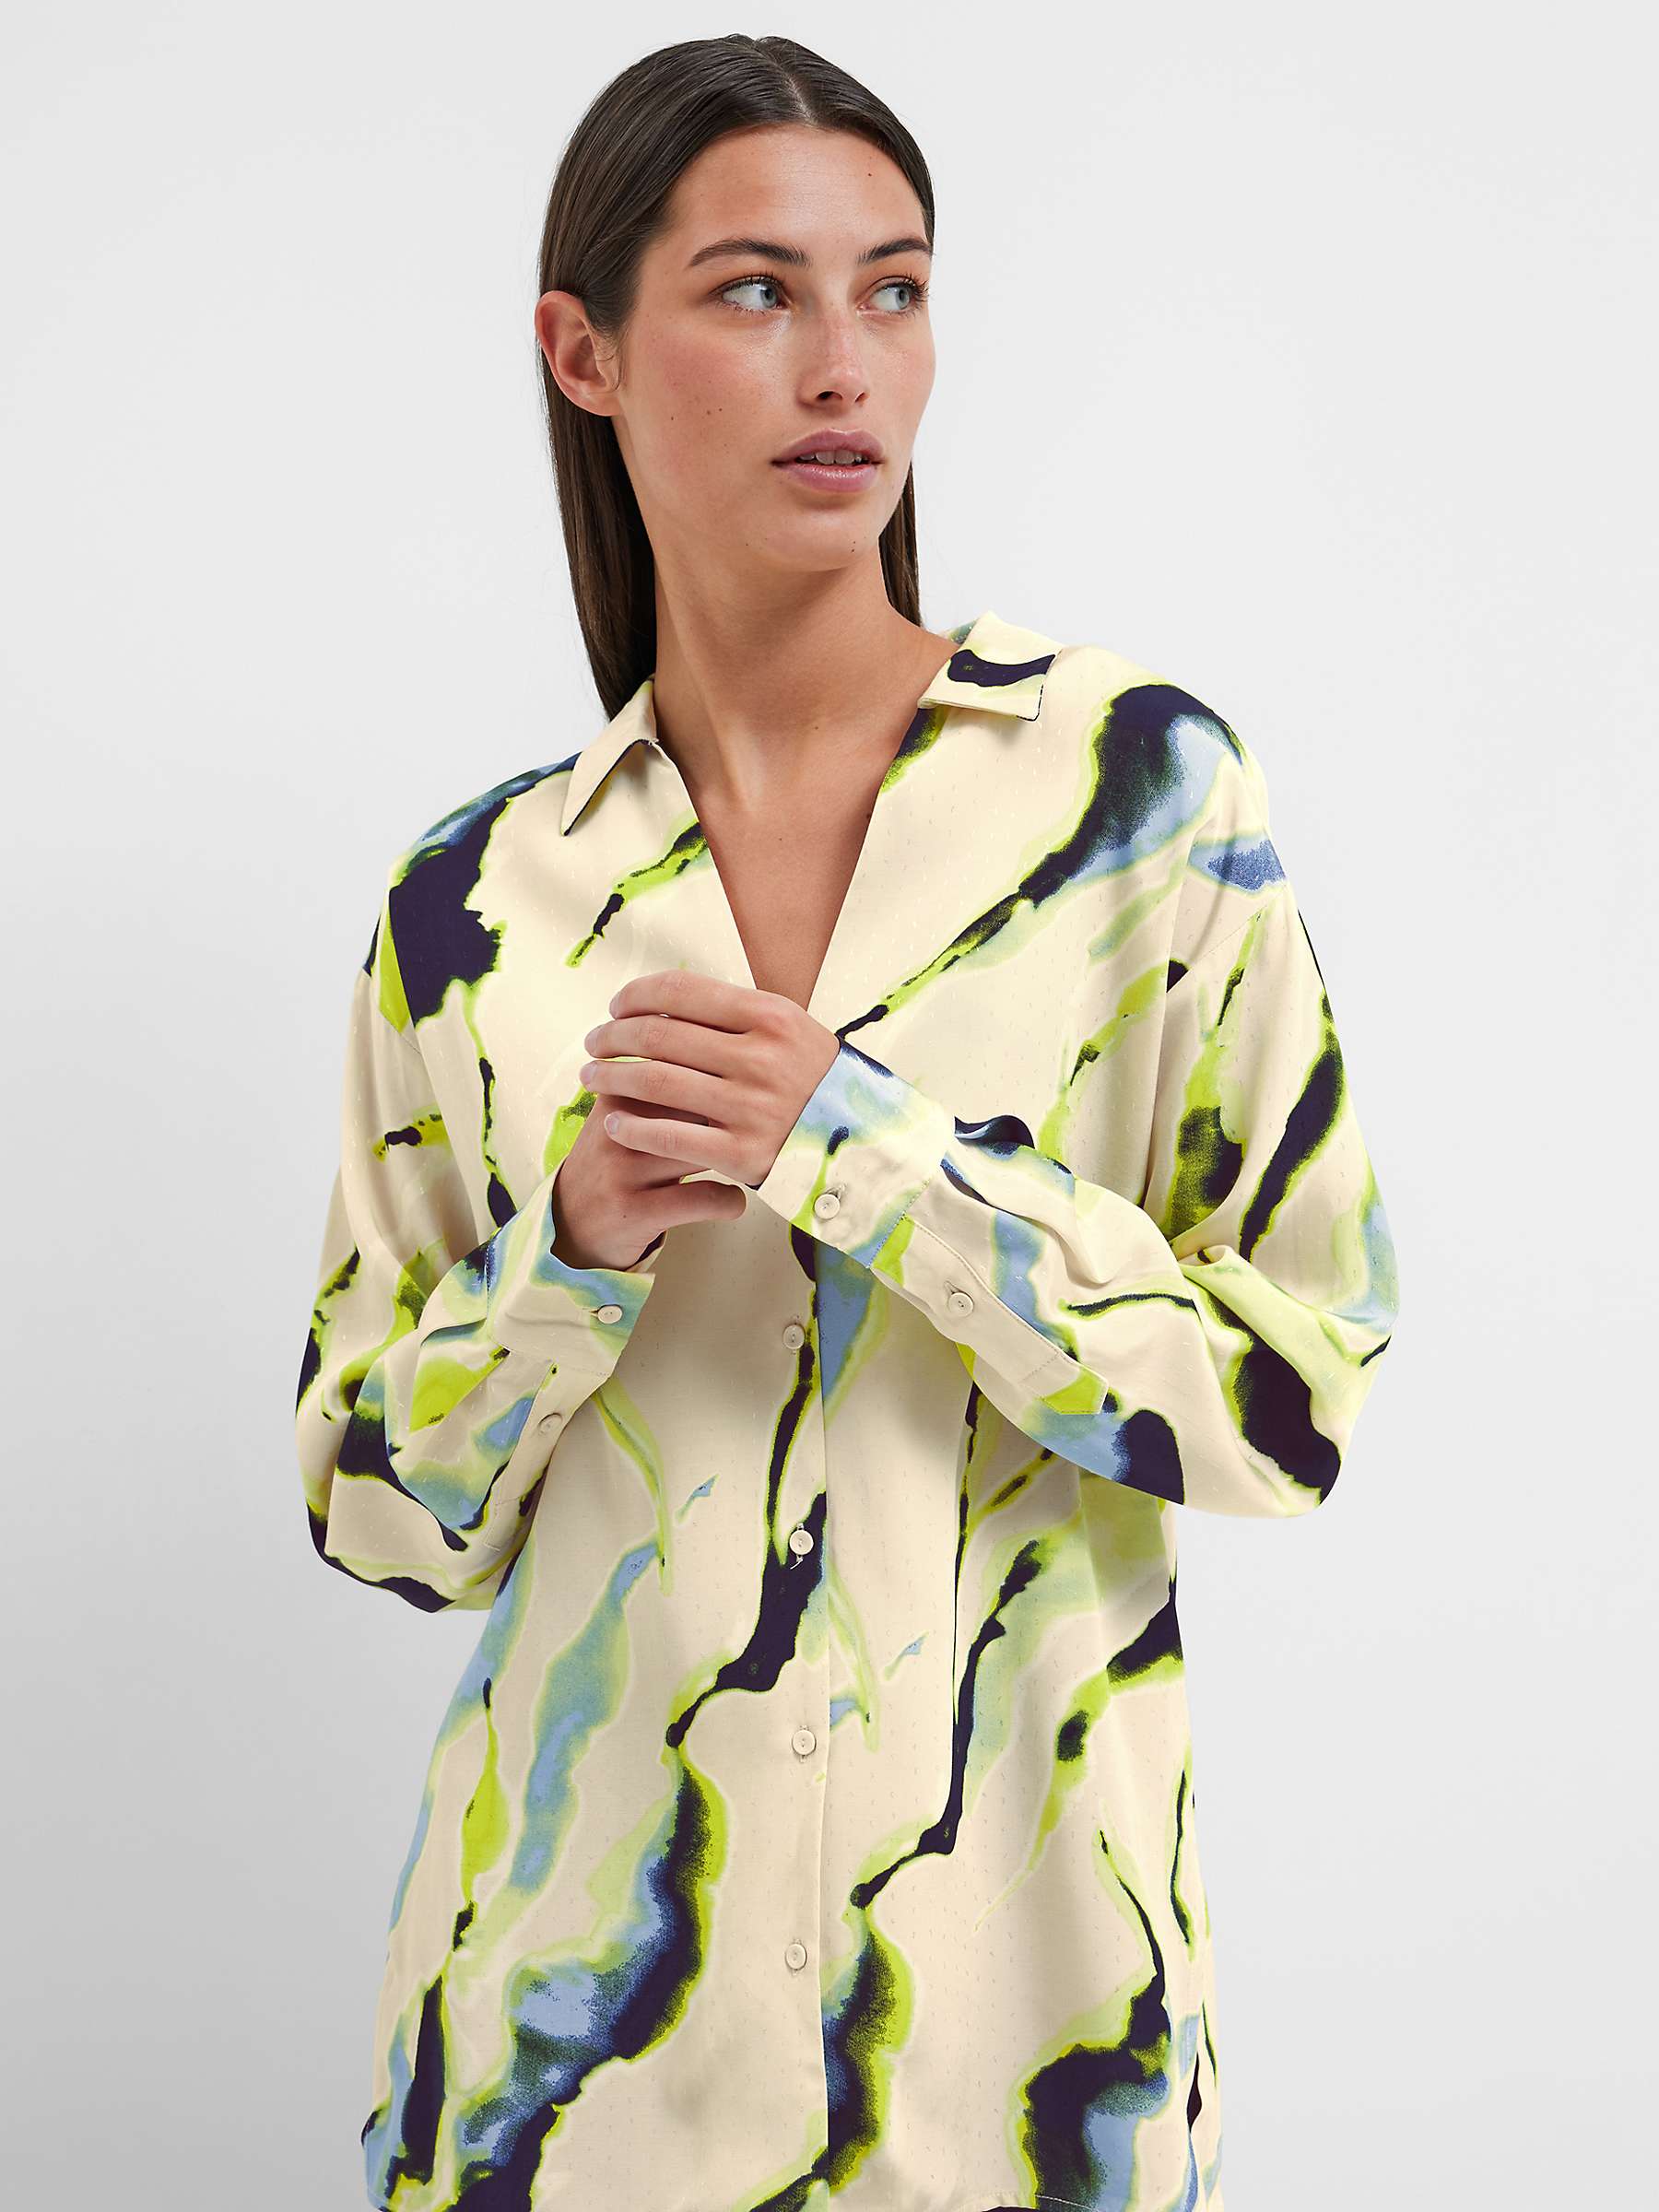 Buy SELECTED FEMME Lilian Abstract Print Shirt, Birch/Multi Online at johnlewis.com